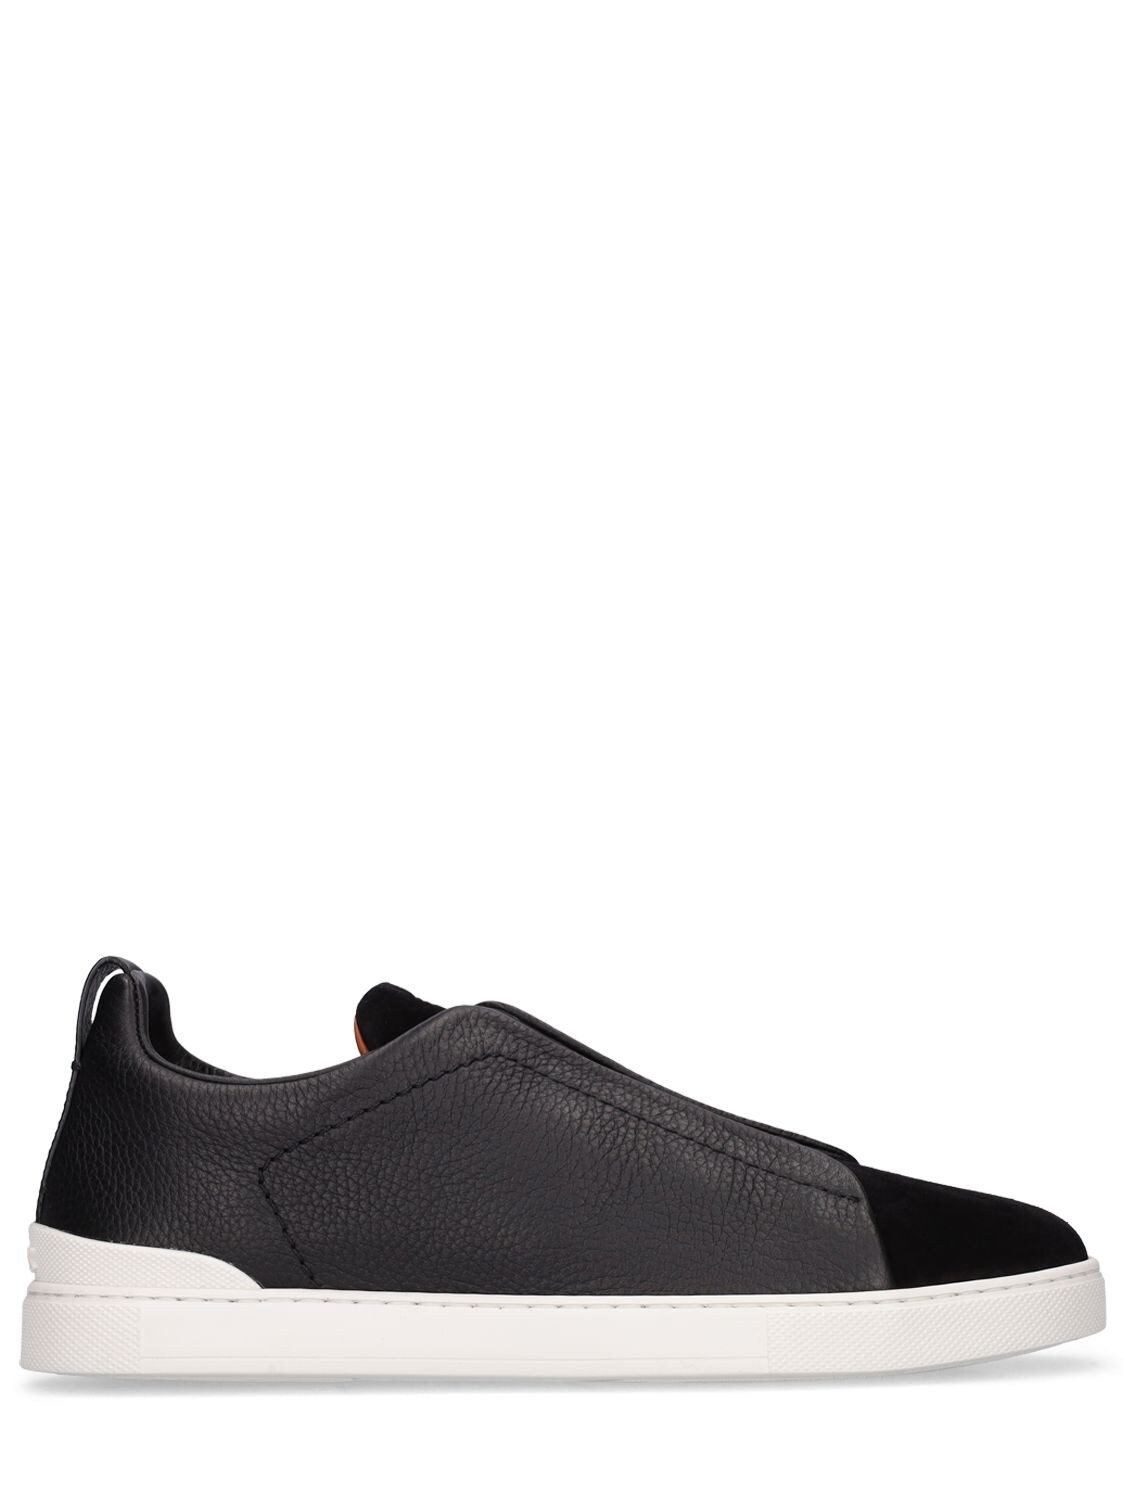 ZEGNA Triple Stitch Leather Low-top Sneakers